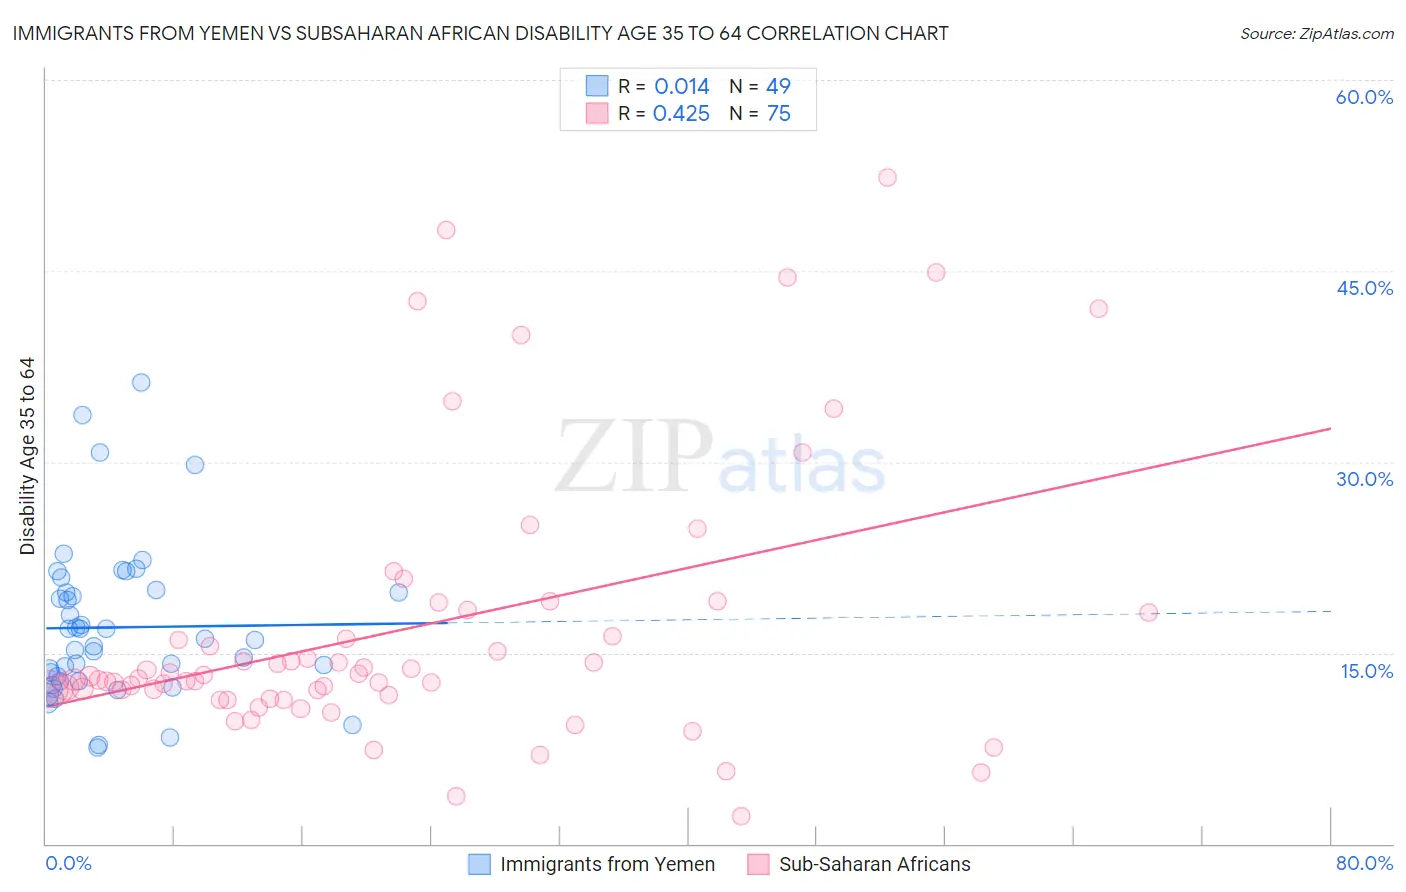 Immigrants from Yemen vs Subsaharan African Disability Age 35 to 64